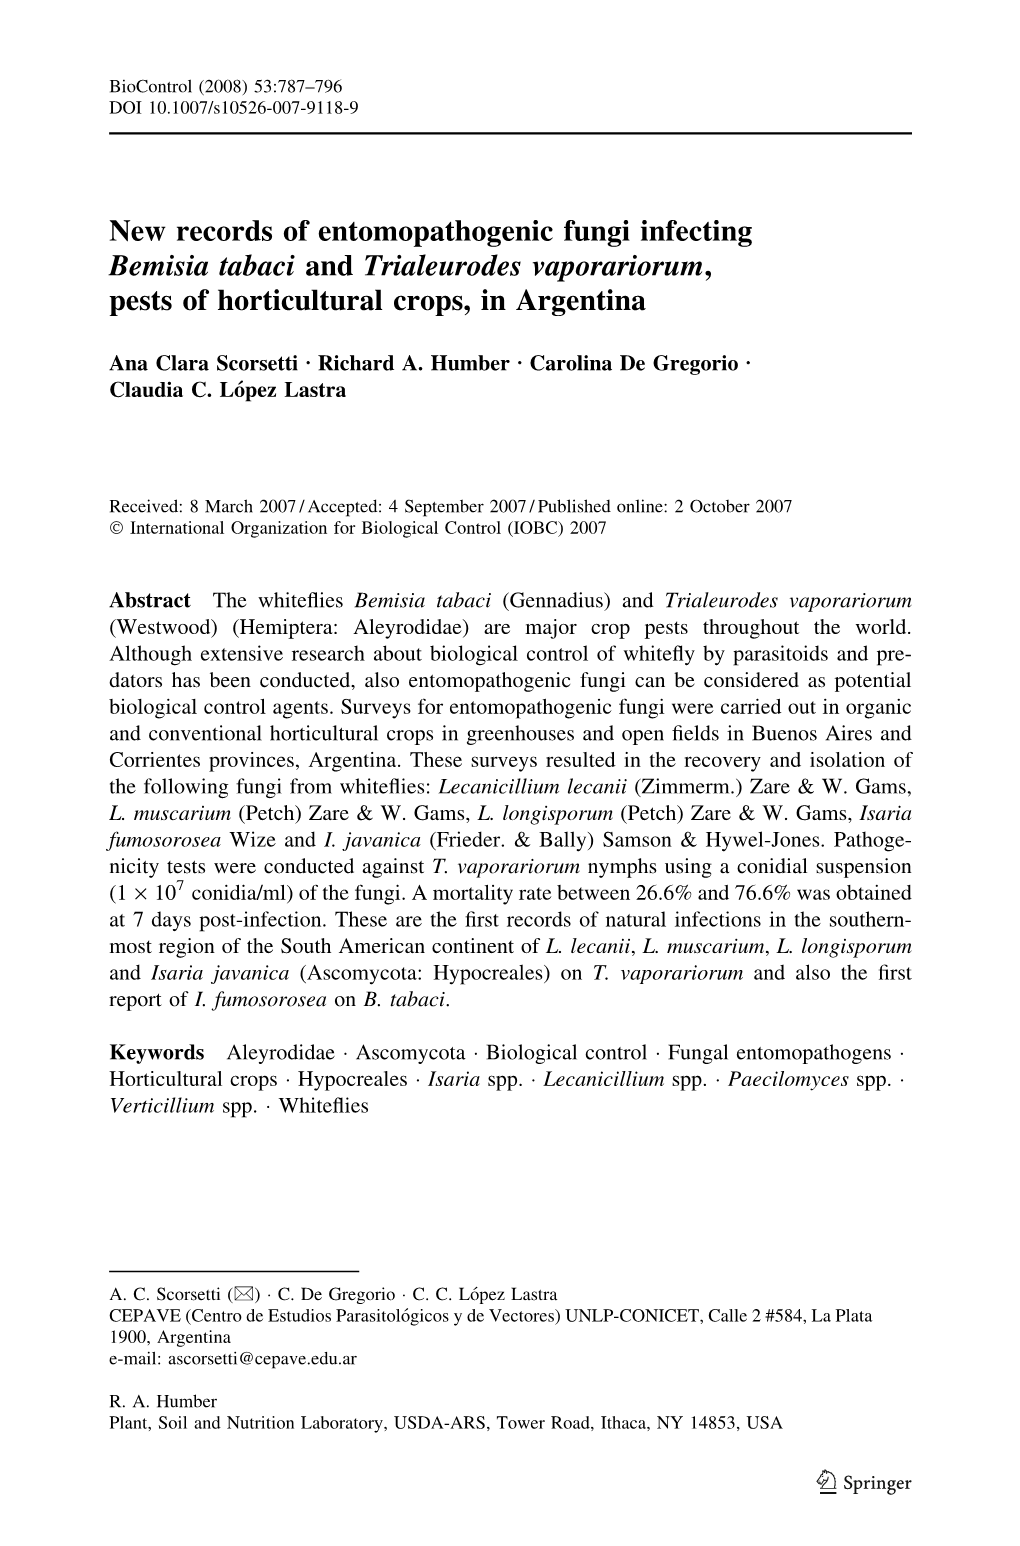 New Records of Entomopathogenic Fungi Infecting Bemisia Tabaci and Trialeurodes Vaporariorum, Pests of Horticultural Crops, in Argentina